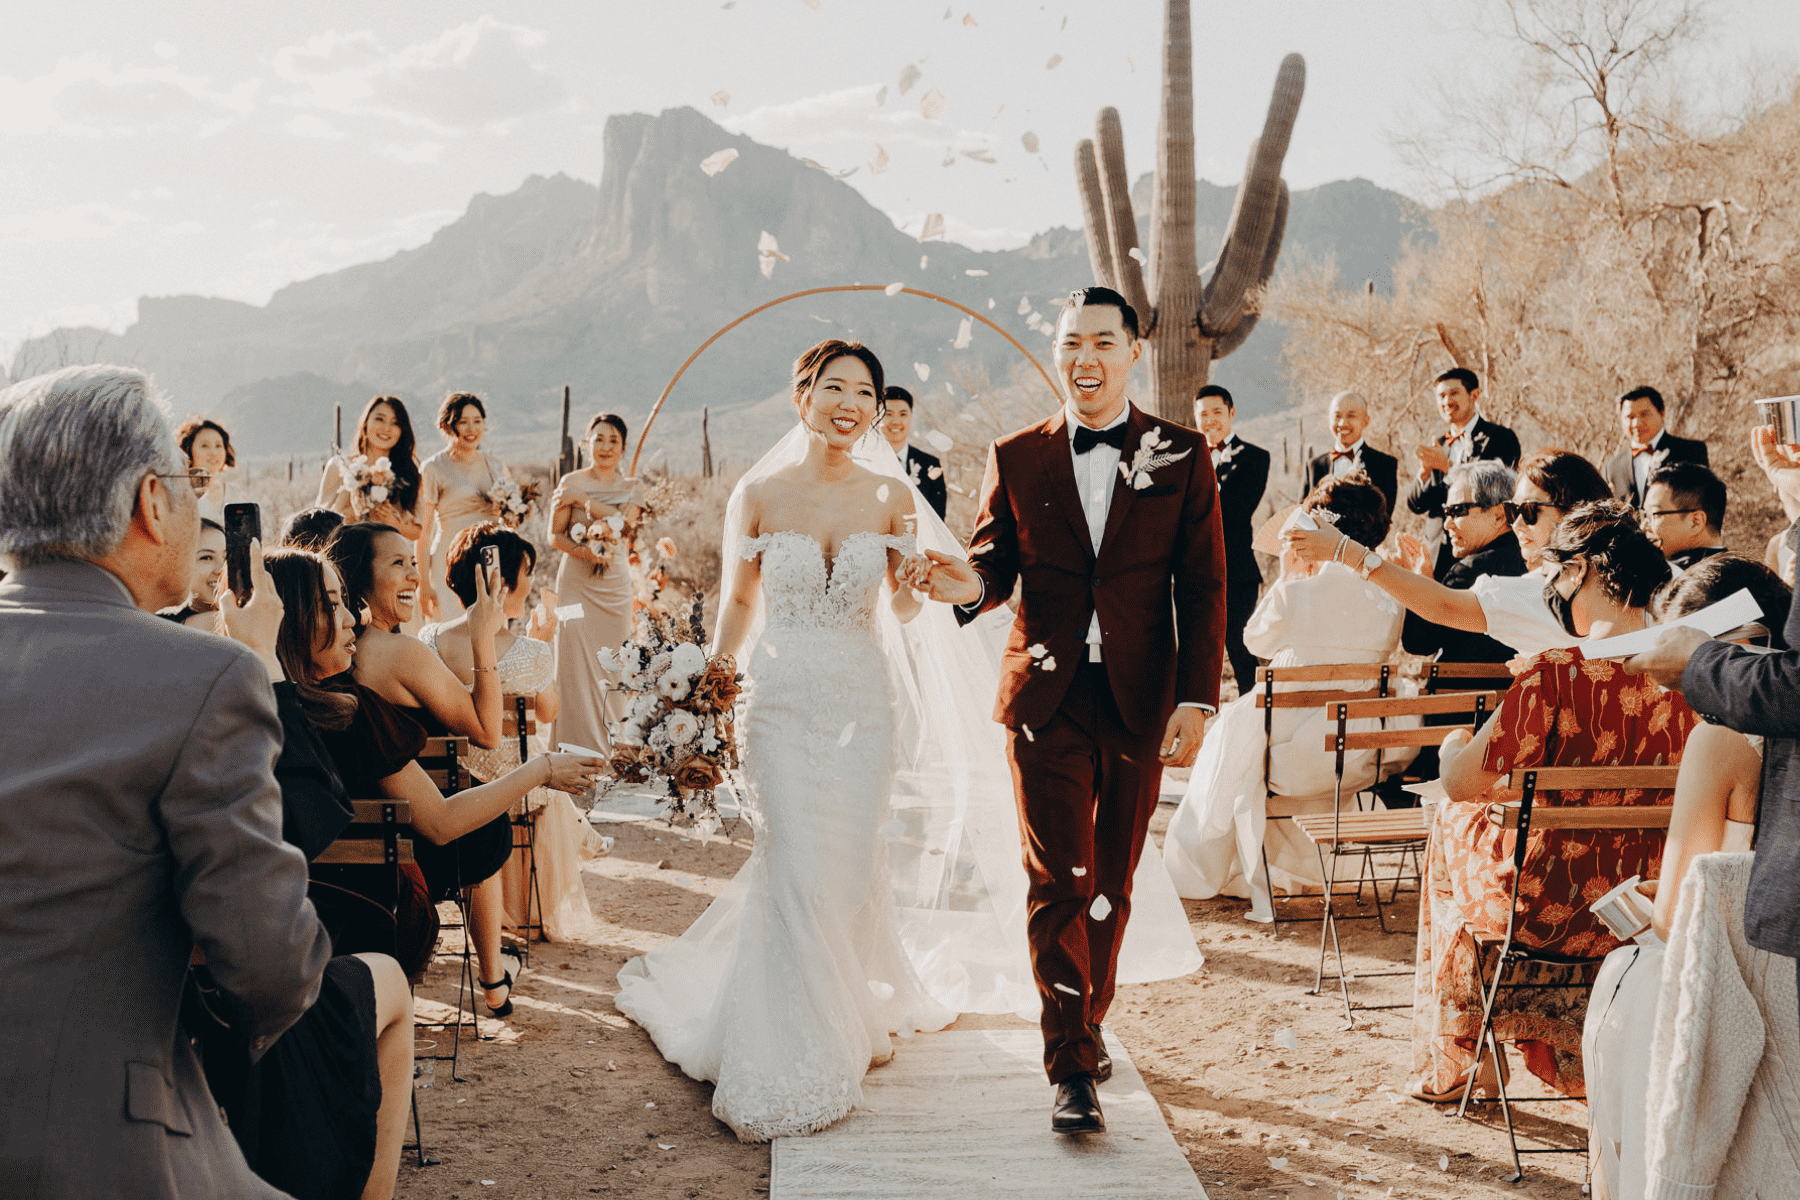 A newly married couple walks back down the aisle as guests throw flower petals.